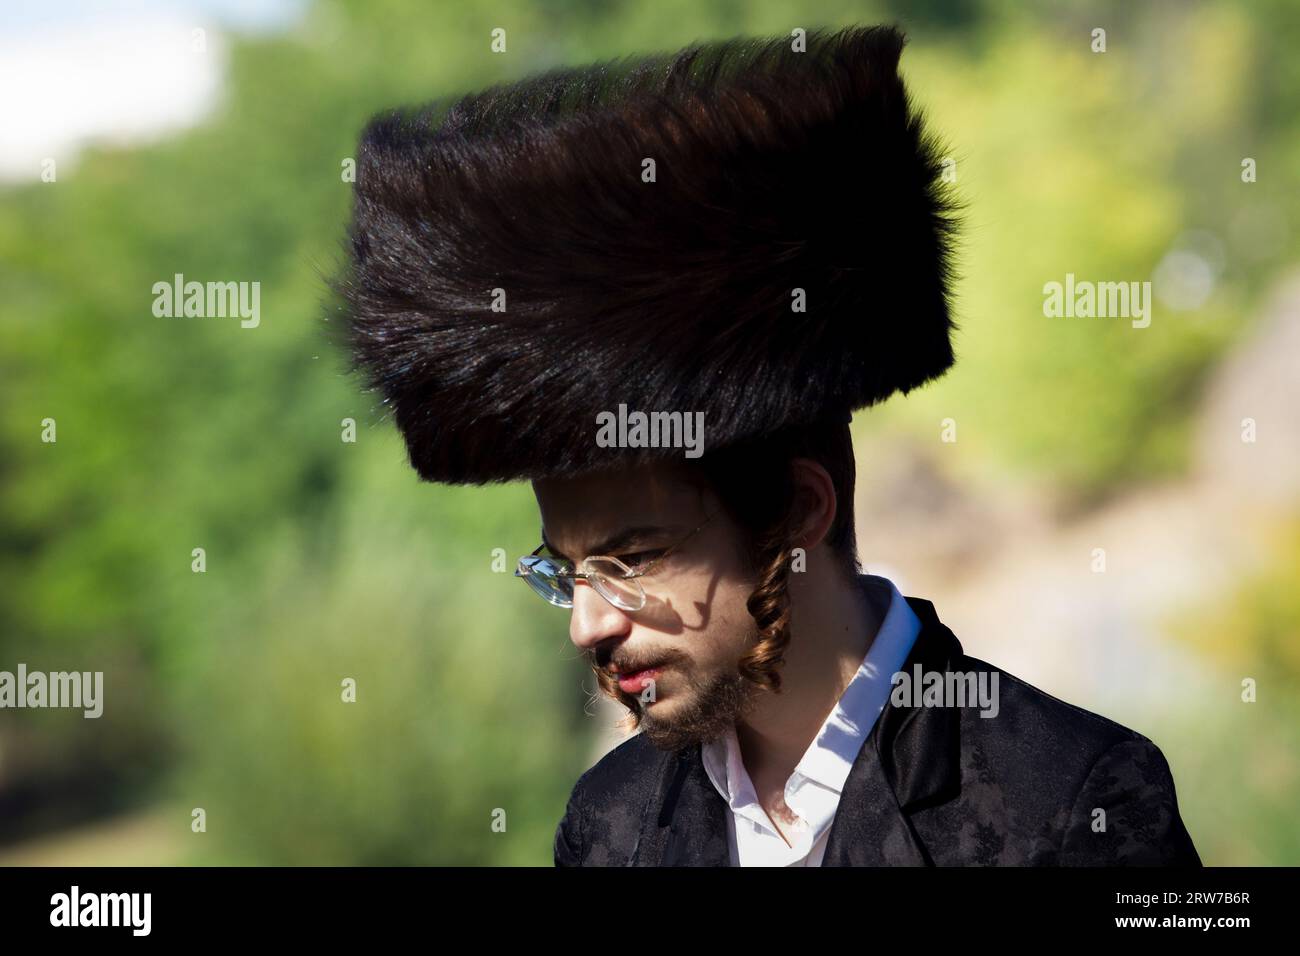 Non Exclusive: UMAN, UKRAINE - SEPTEMBER 16, 2023 - A Hasidic pilgrim in a shtreimel is pictured during the celebration of Rosh Hashanah, the Jewish N Stock Photo